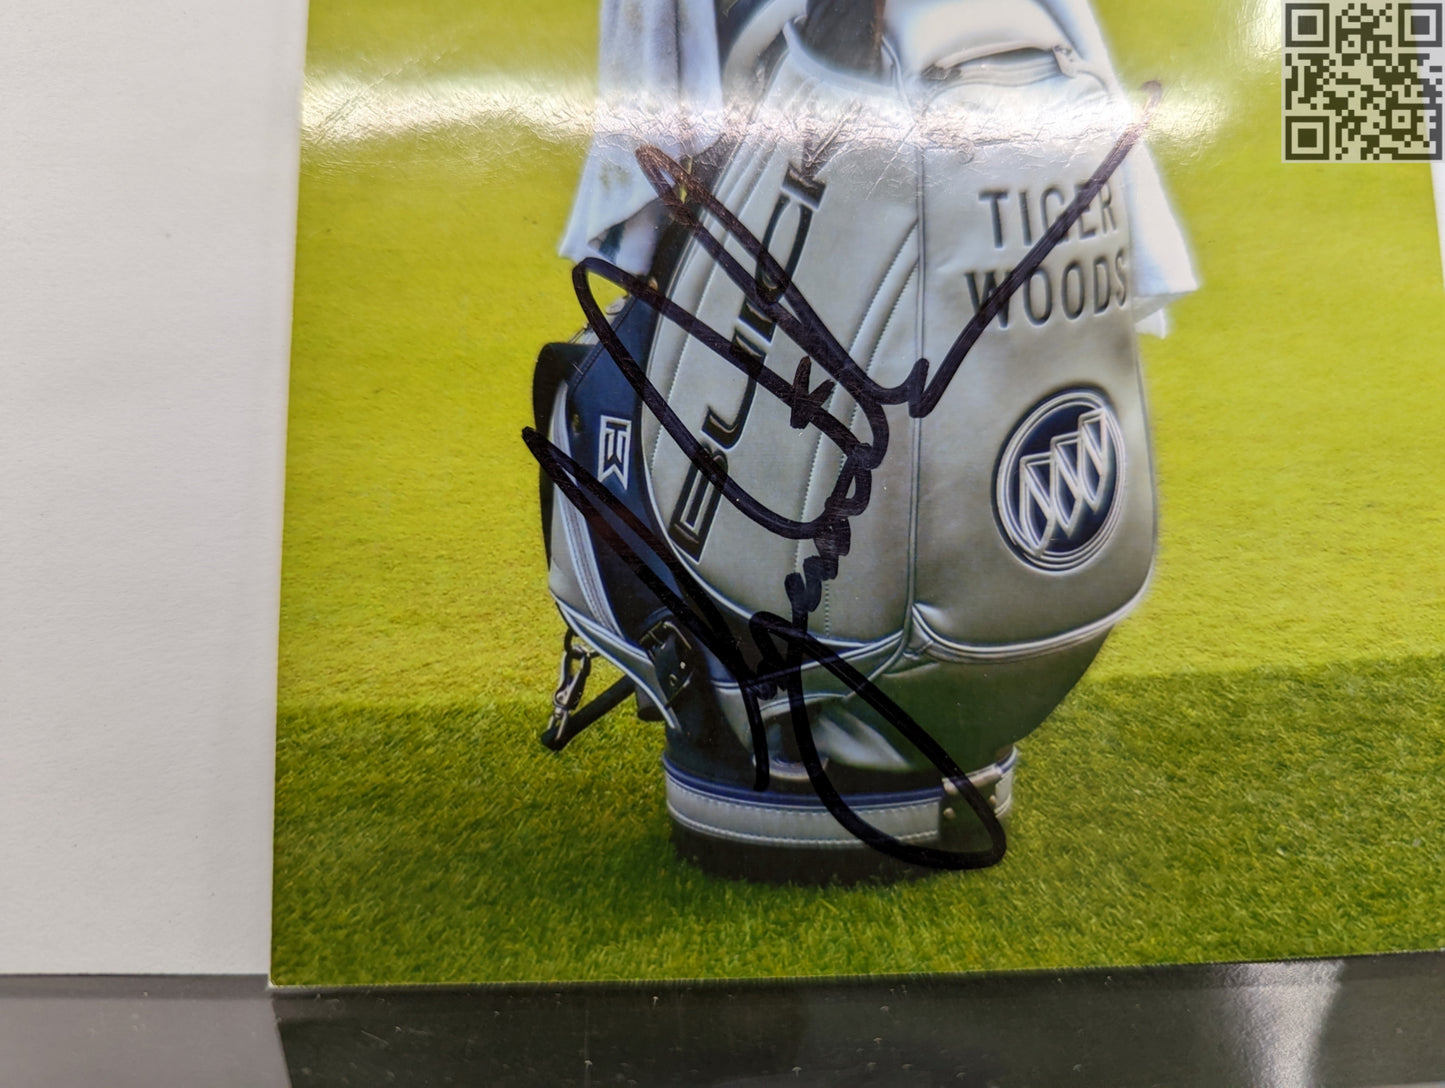 2000's Tiger Woods Signed Buick Golf Back Photograph